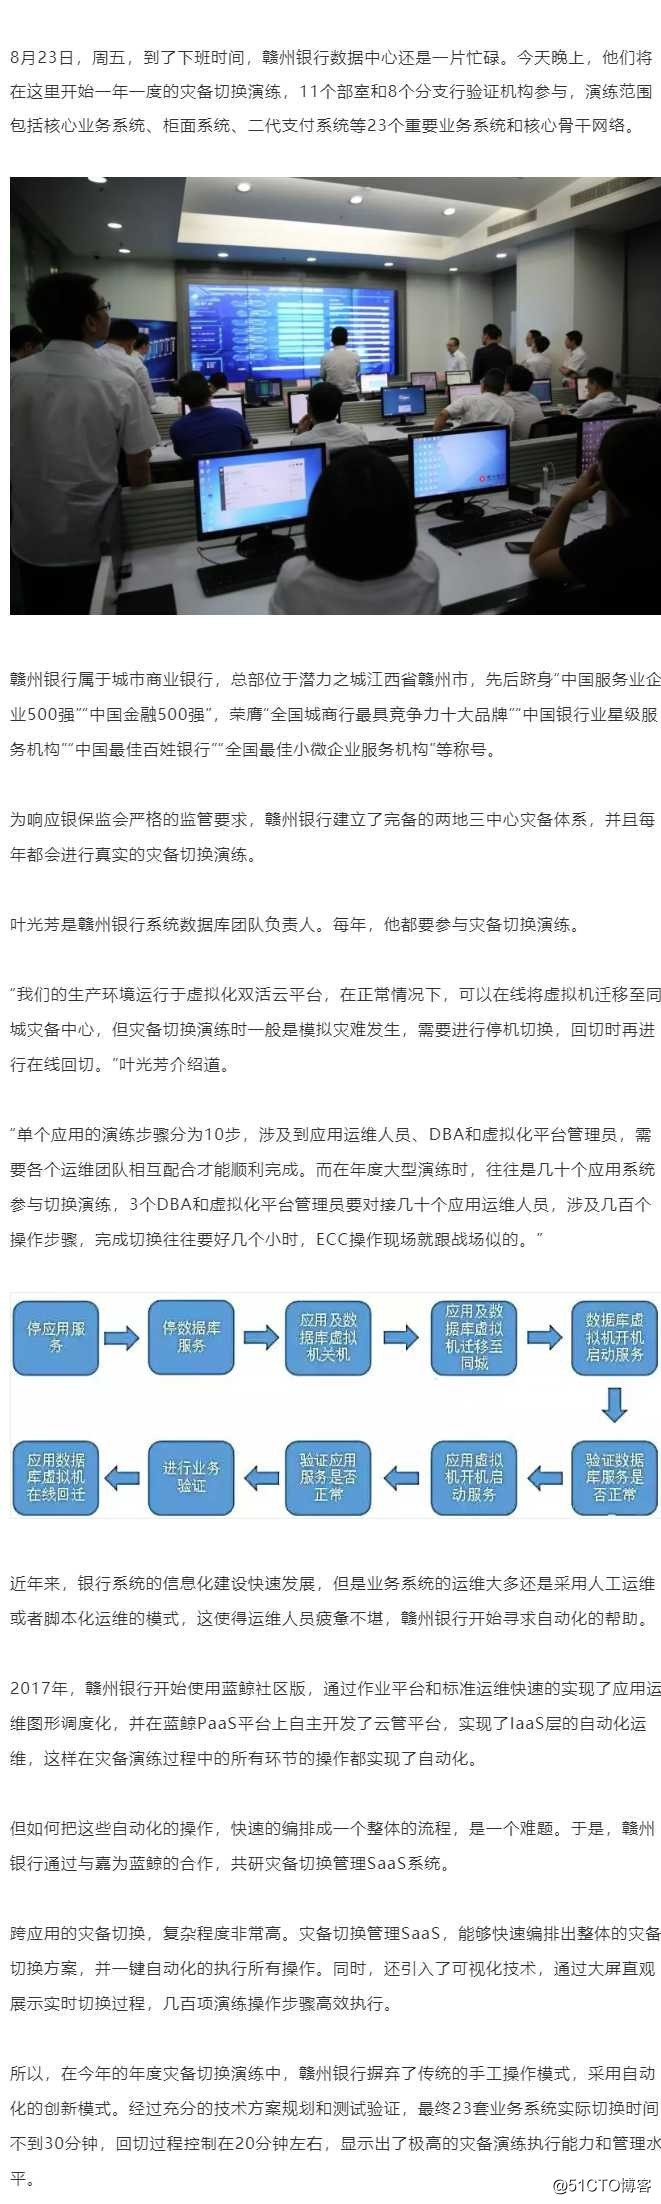 Ganzhou Bank enhance scientific and technological innovation, and a key switch .png disaster recovery